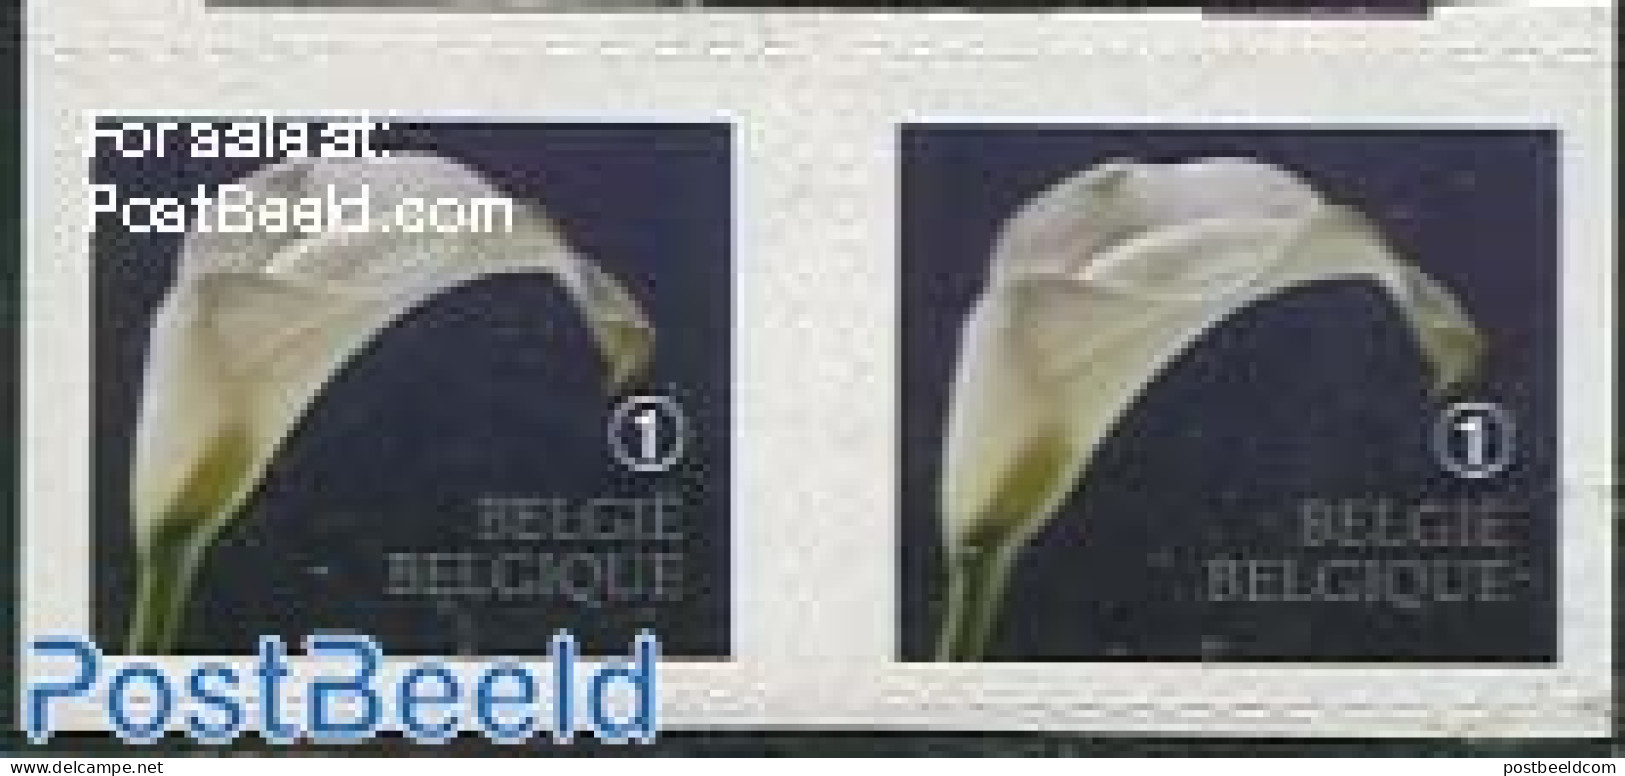 Belgium 2013 Mourning Stamps, Pair S-a, Mint NH, Nature - Flowers & Plants - Neufs